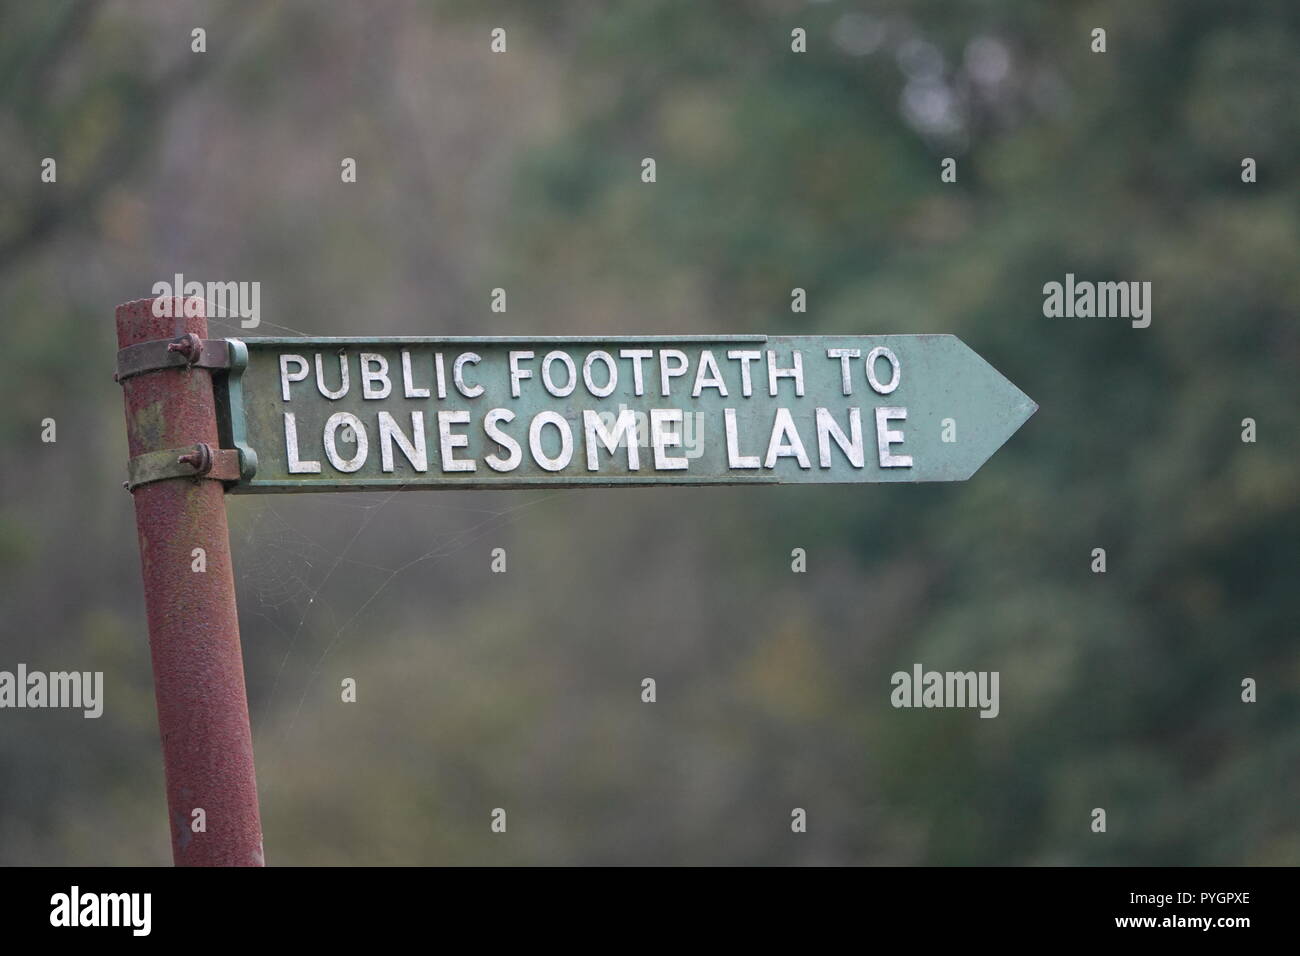 Public Footpath to Lonesome Lane sign Stock Photo